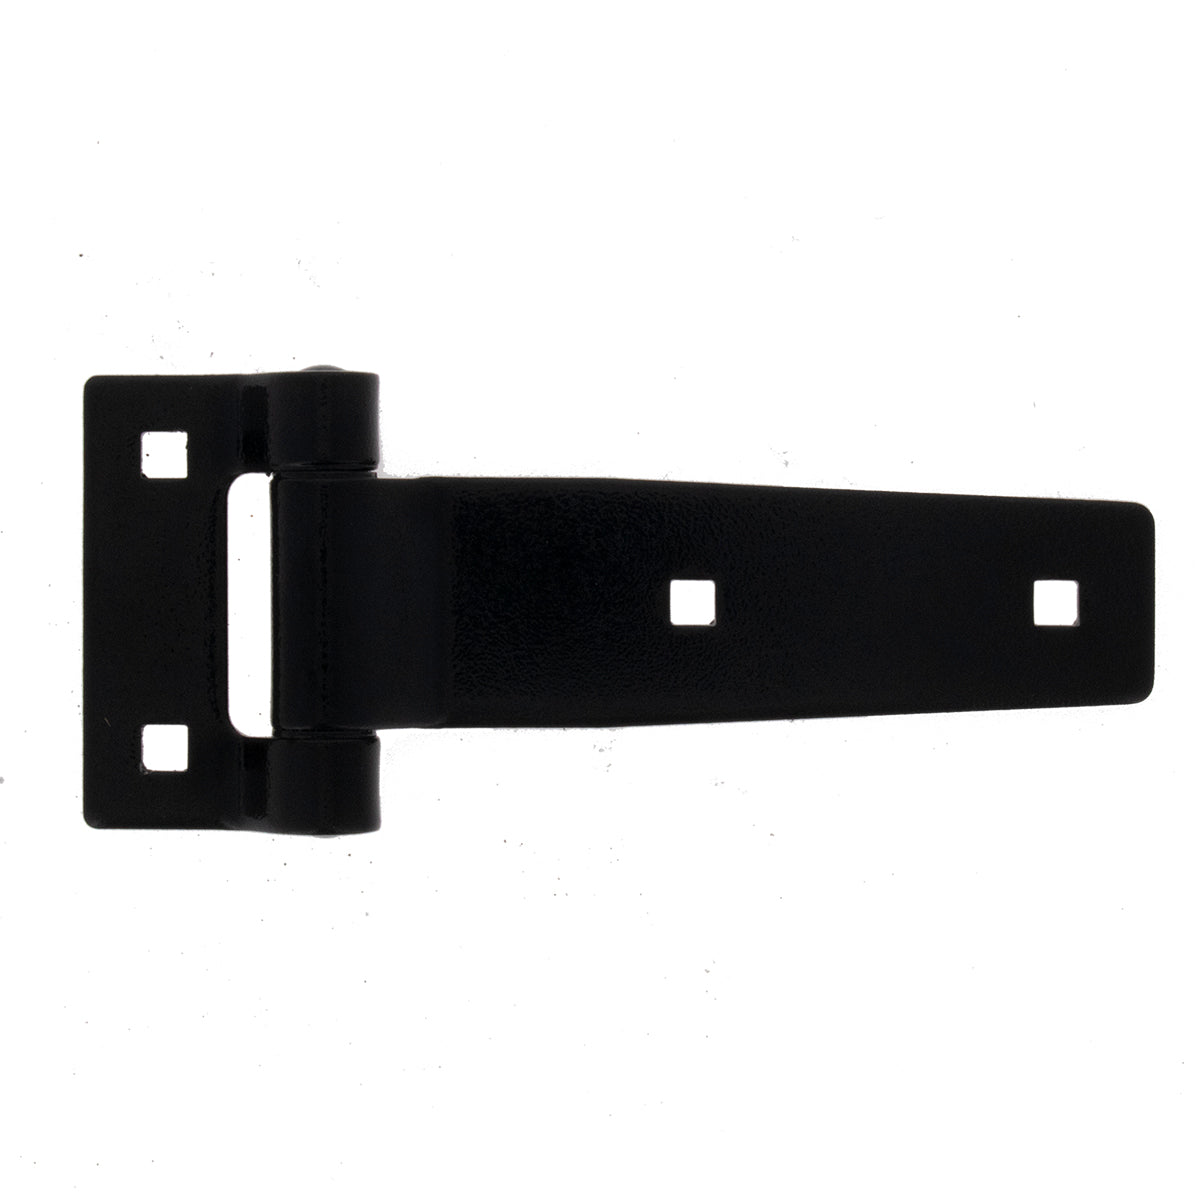 5&quot; Black stainless steel strap hinge, front view